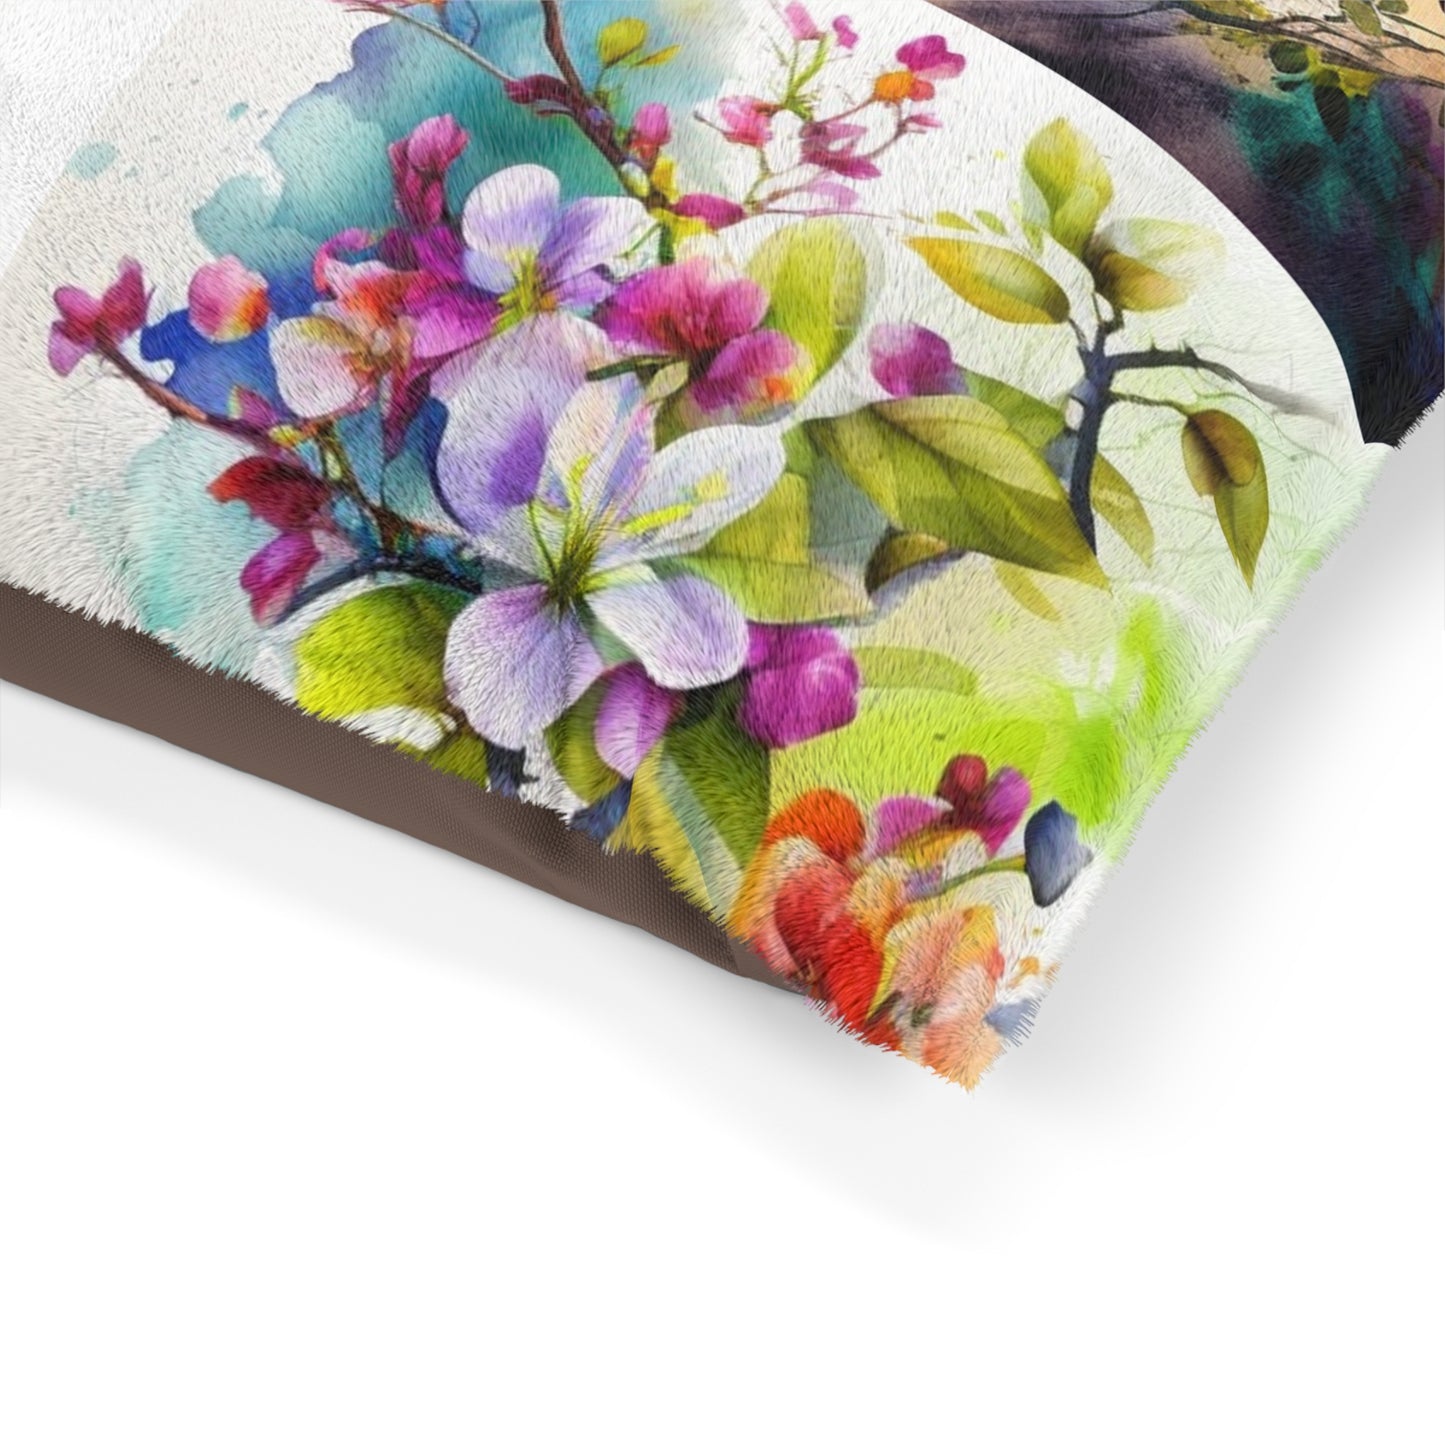 Pet Bed Mother Nature Bright Spring Colors Realistic Watercolor 5